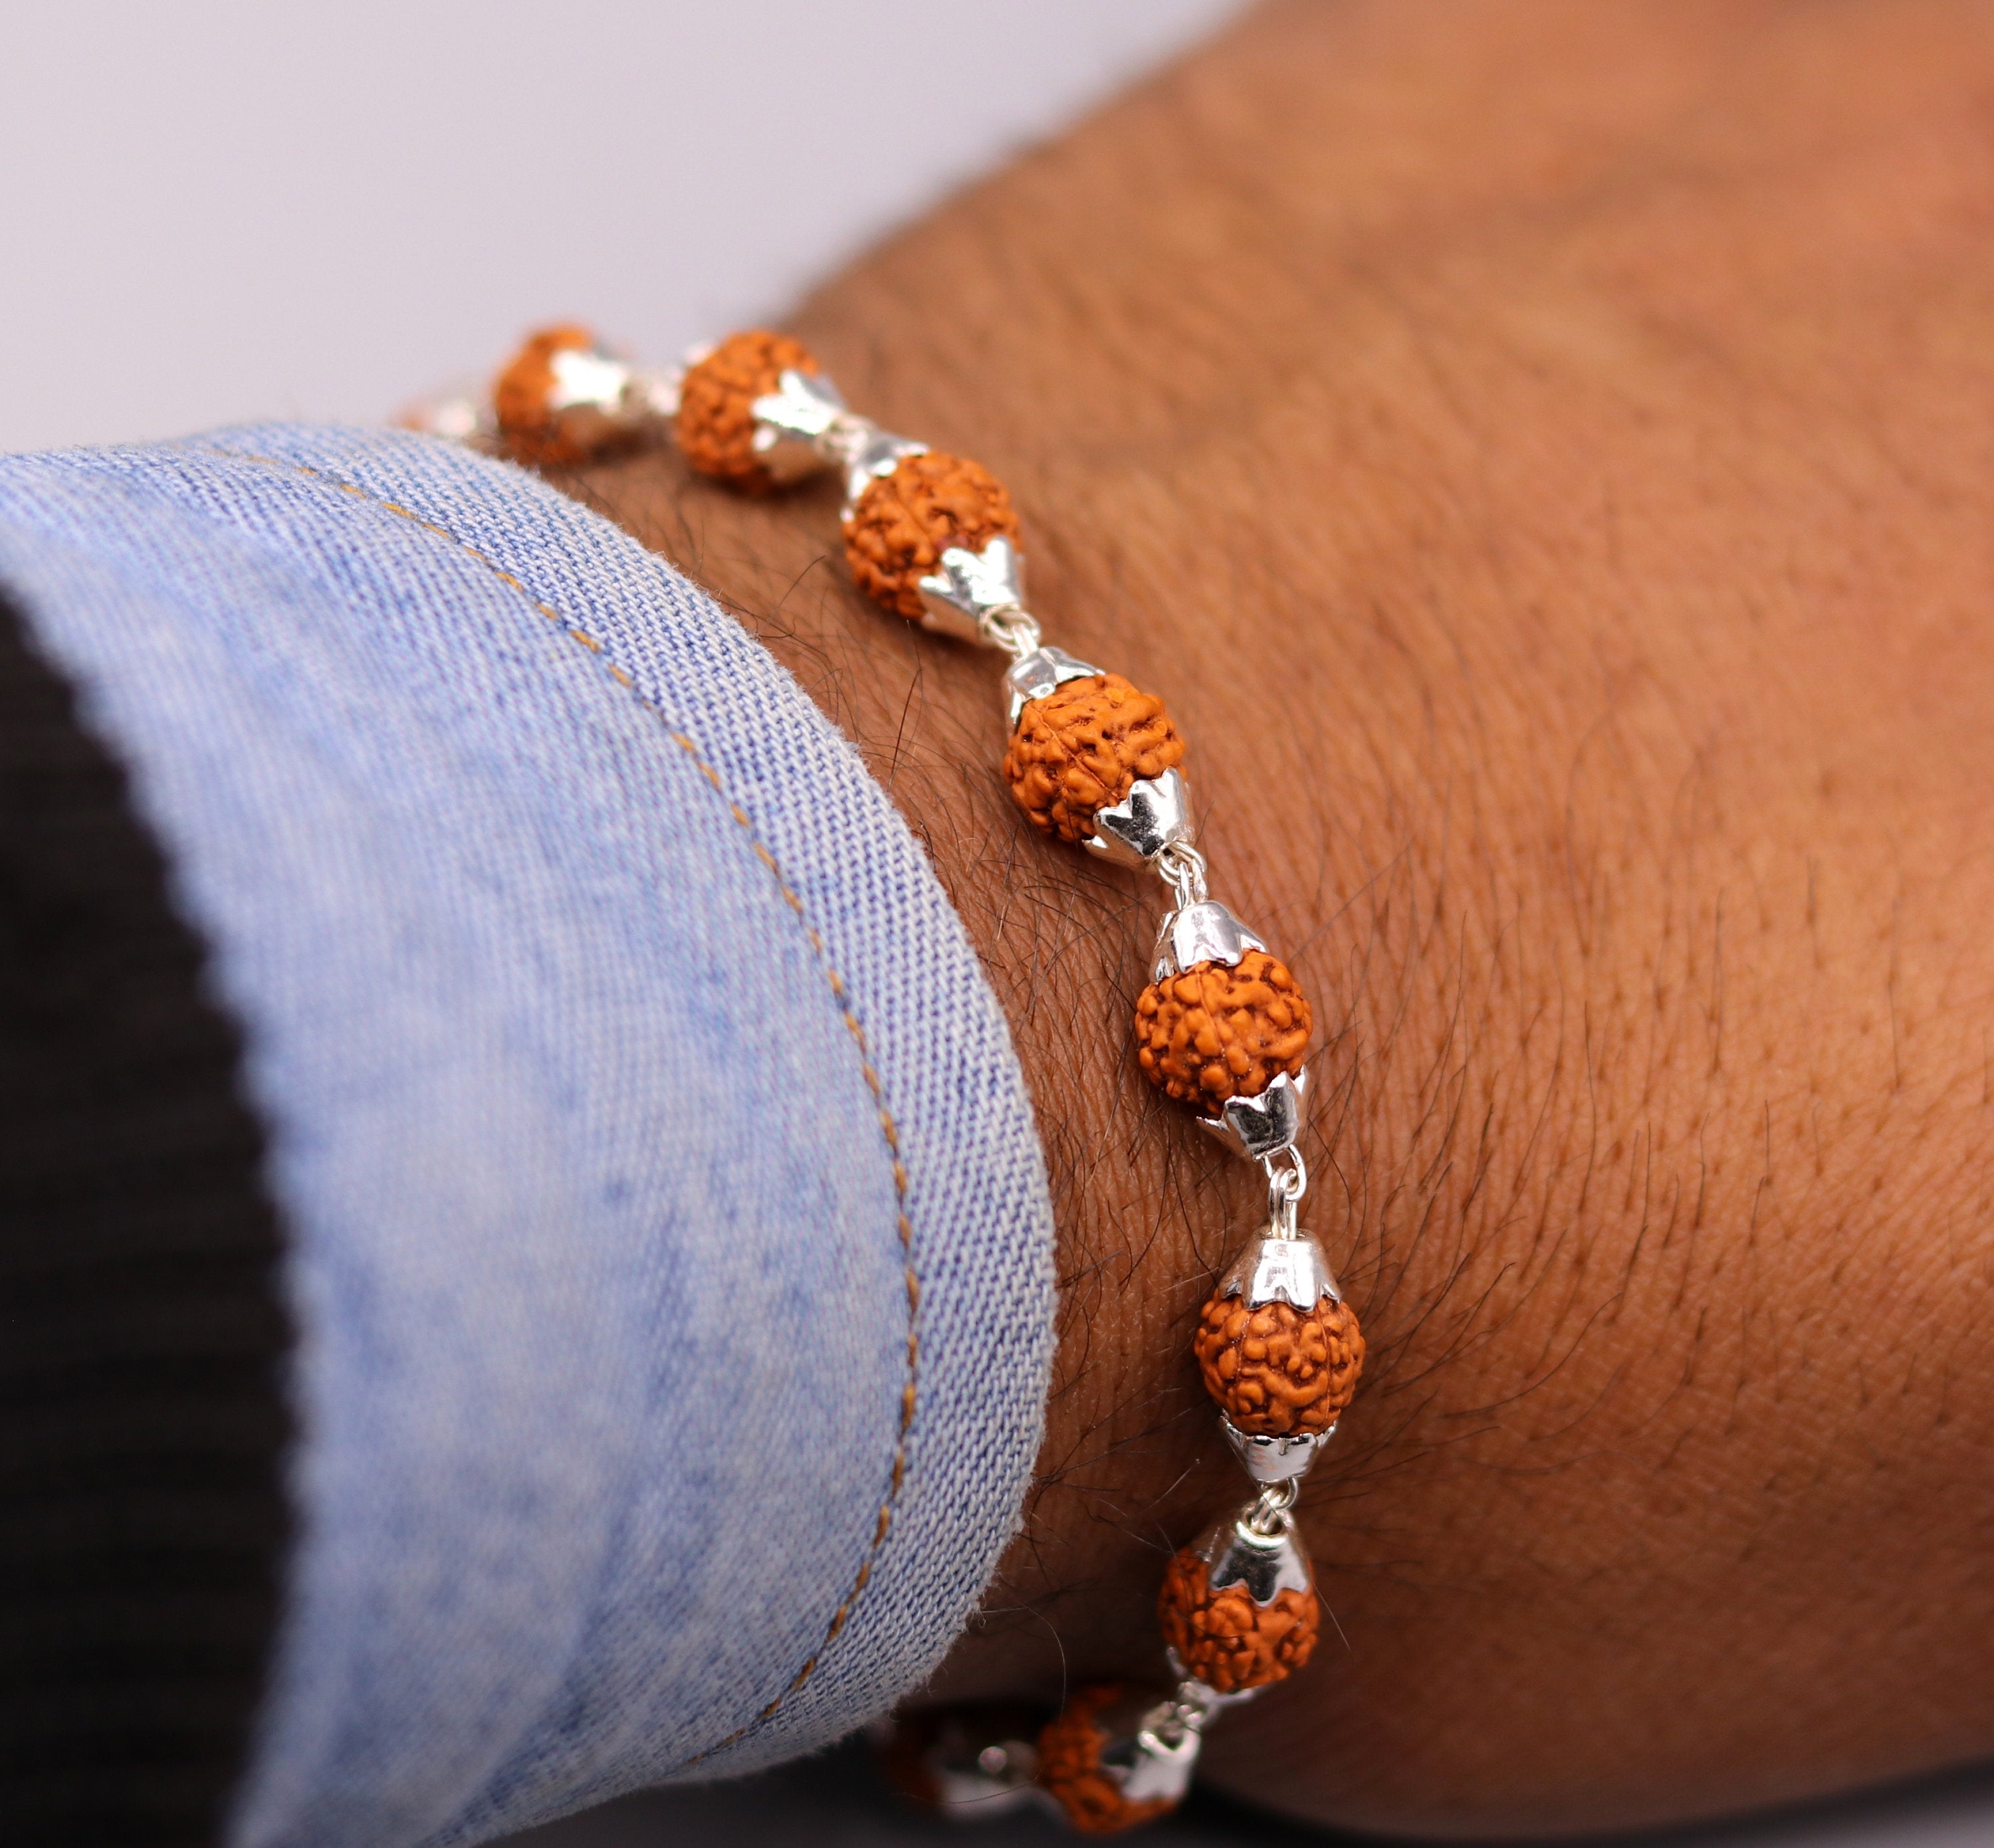 Buy Trideva Blessings Narayana Bracelet/ 10 Mukhi Rudraksha Bracelet/Ten  Face Rudraksha Bracelet - Made in Pure Silver Online at Low Prices in India  - Amazon.in